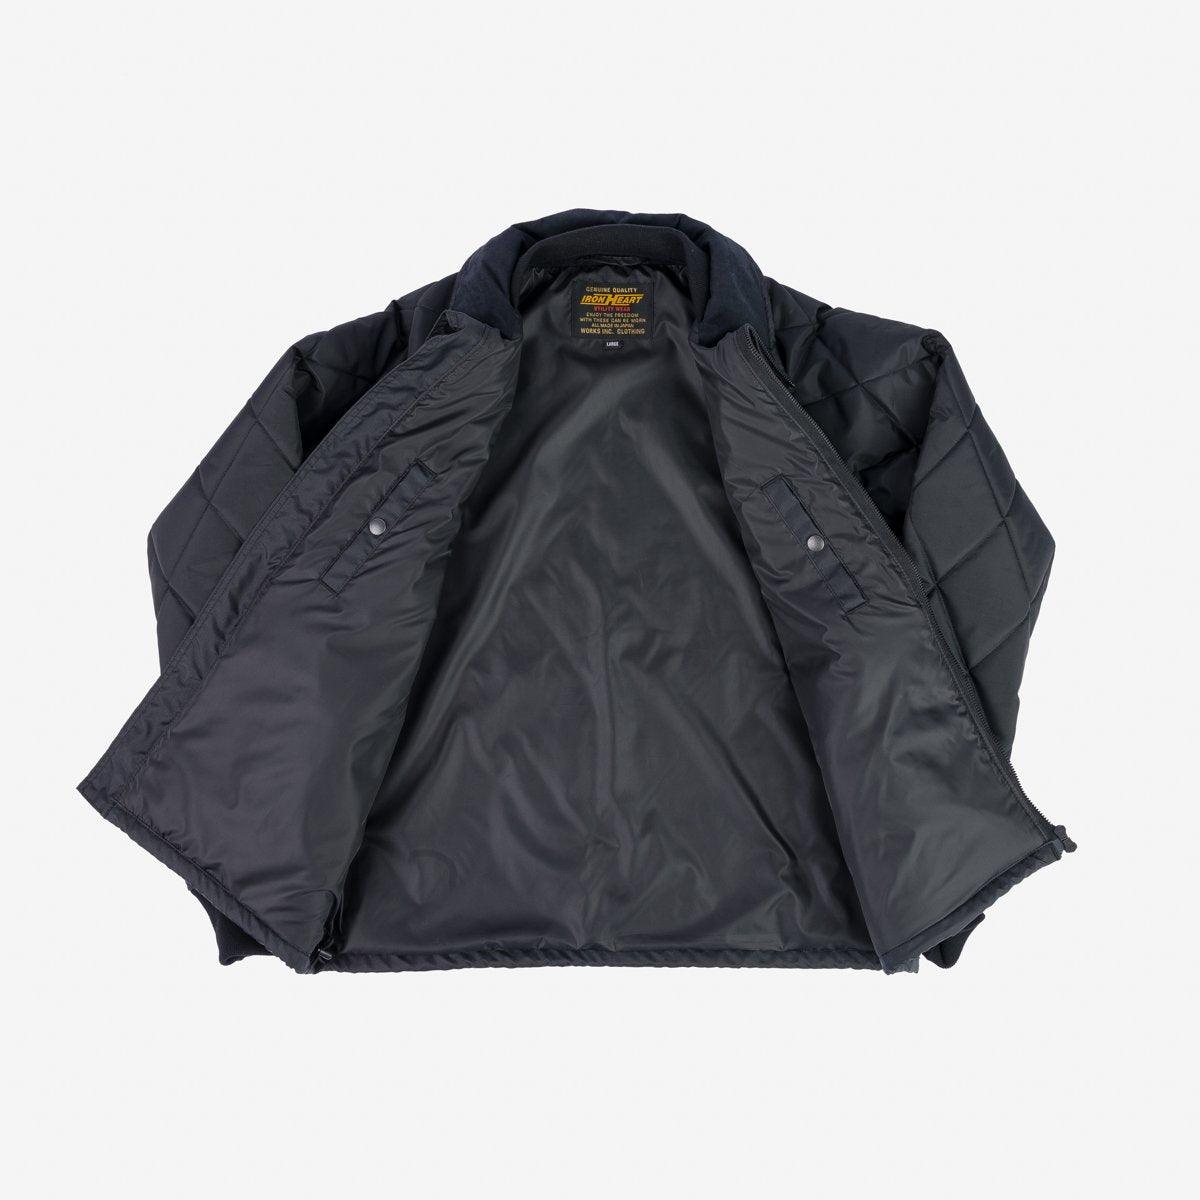 Iron Heart IHJ-127-BLK Primaloft® Quilted Rider's Jacket - Black - Guilty Party